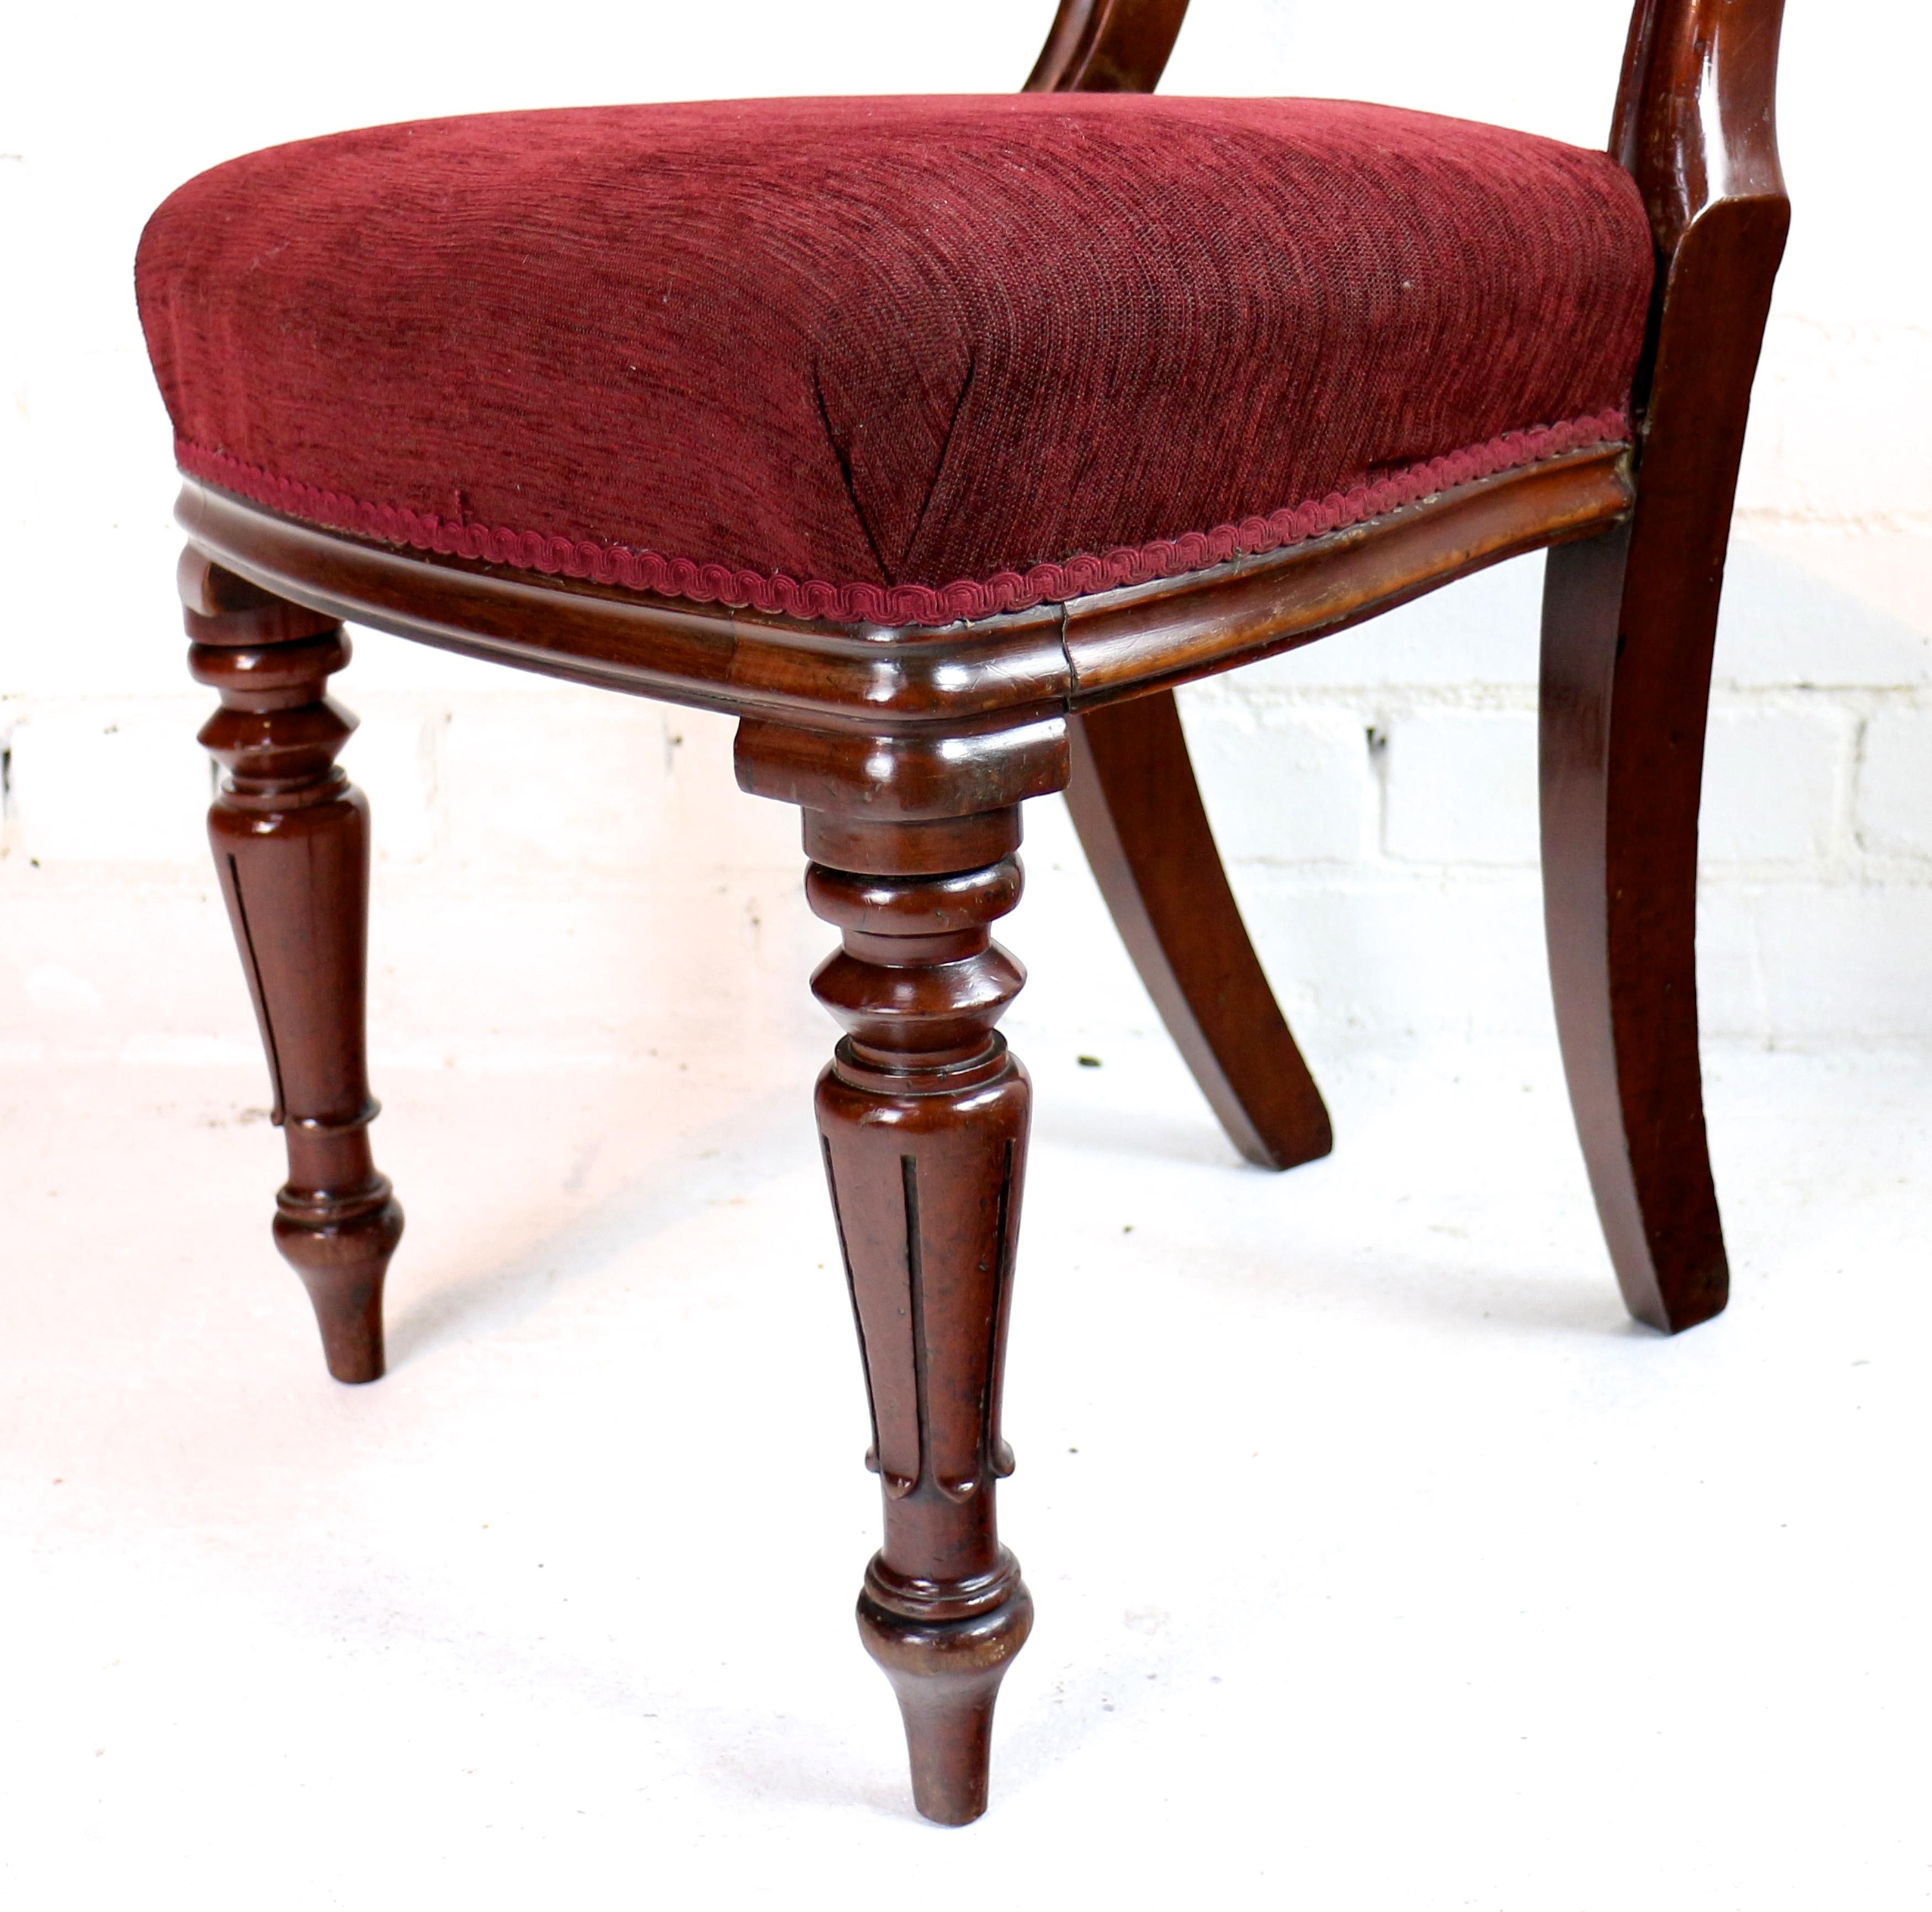 Set of 10 Antique English William IV Mahogany Dining Chairs by J Proctor For Sale 5